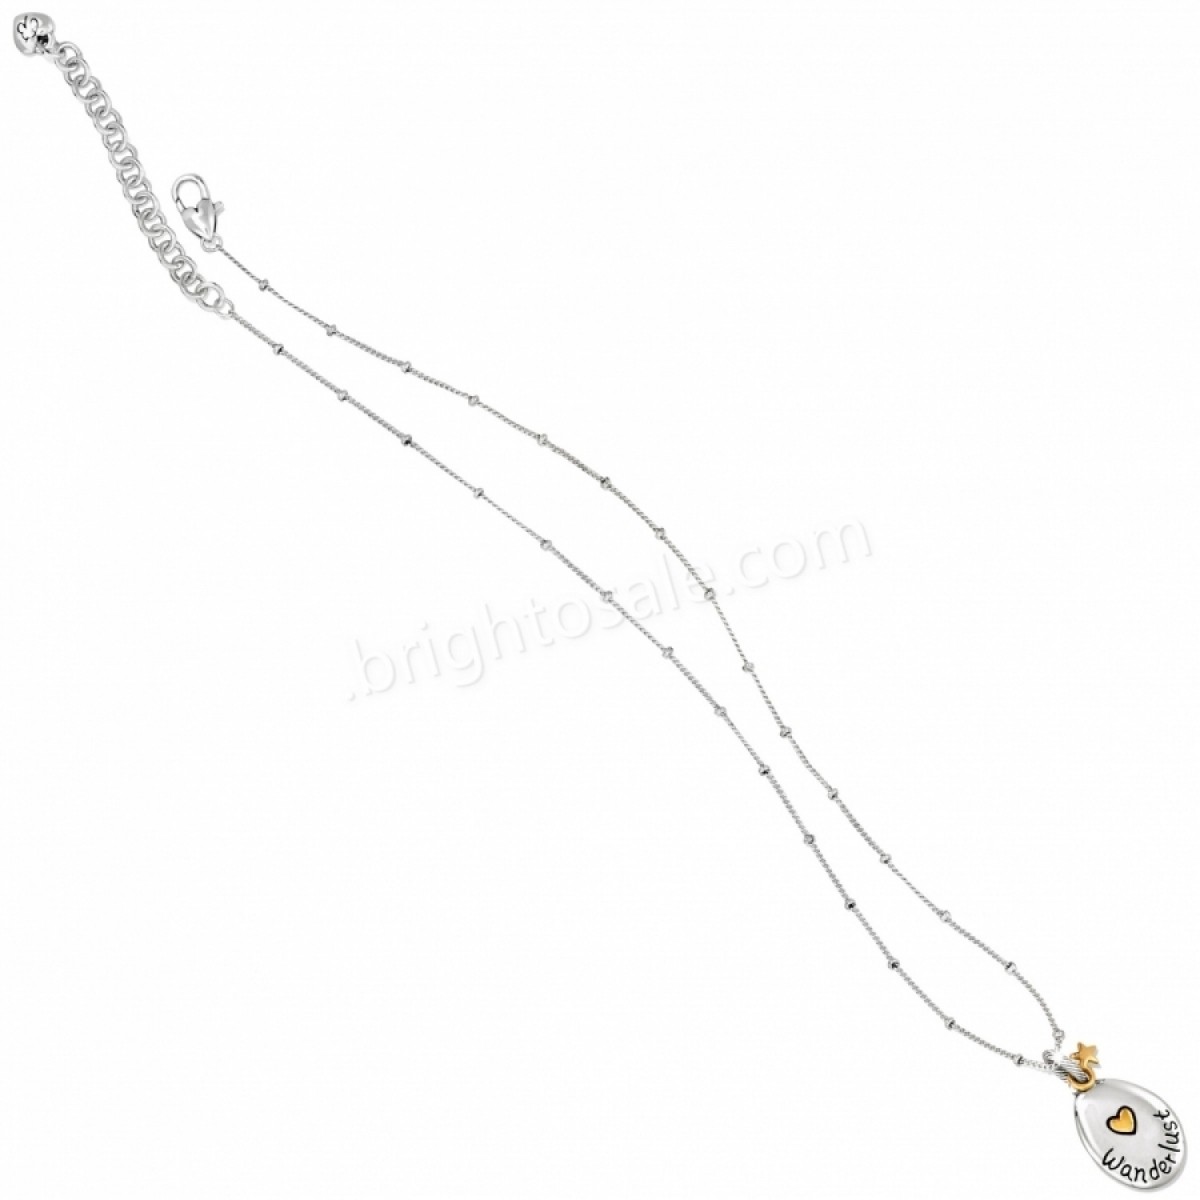 Brighton Collectibles & Online Discount Twinkle Petite Necklace - -2